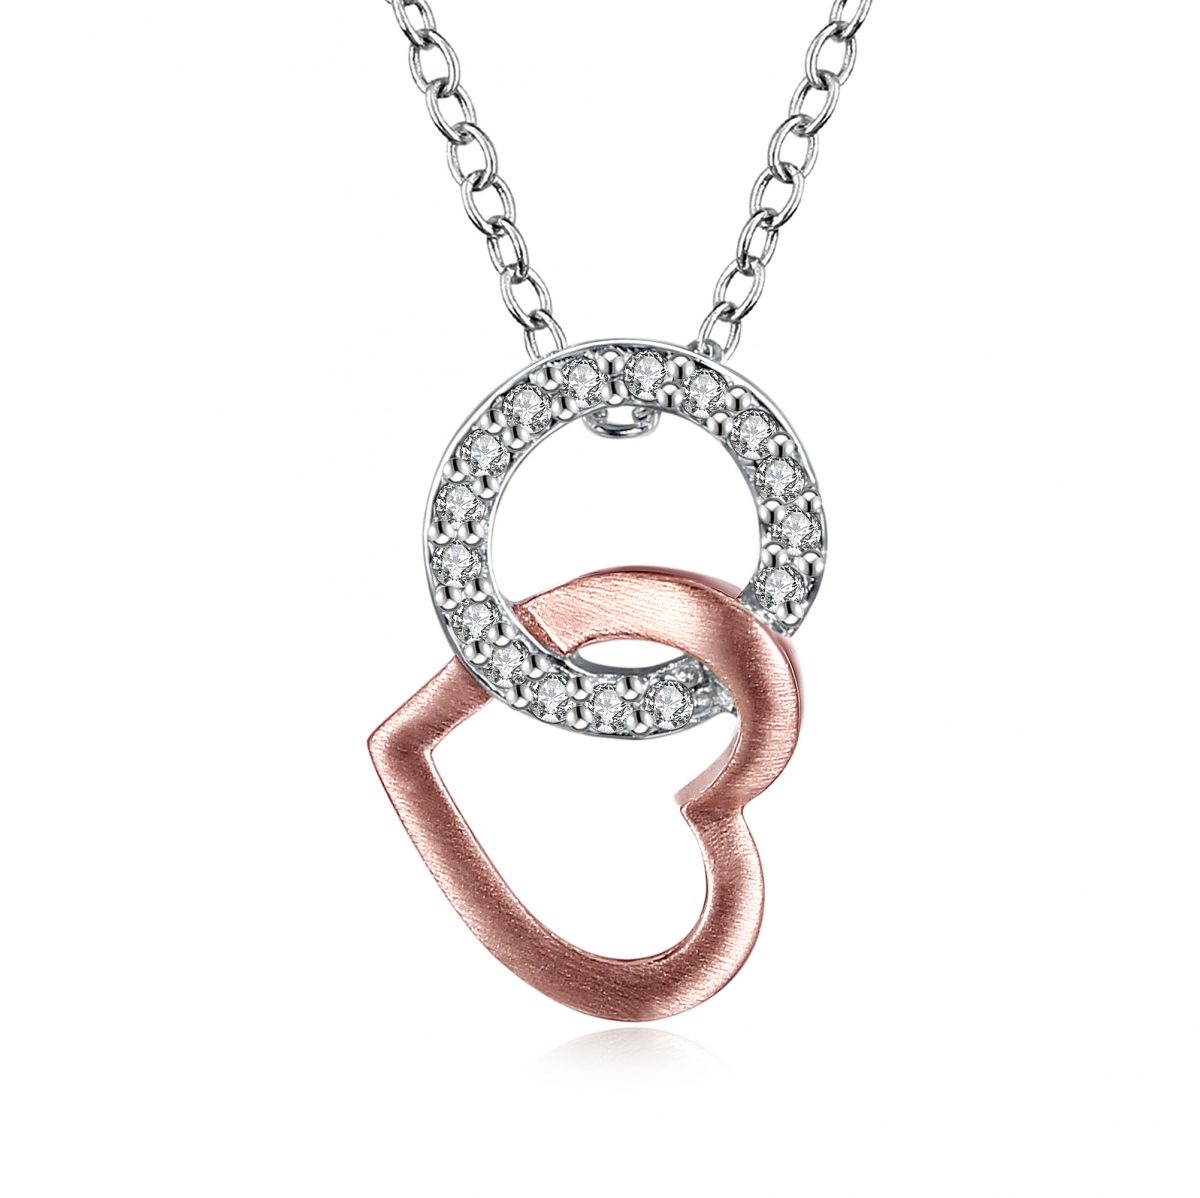 Two Tone Interlocking Circle Heart Necklace - Silver & Rose Gold